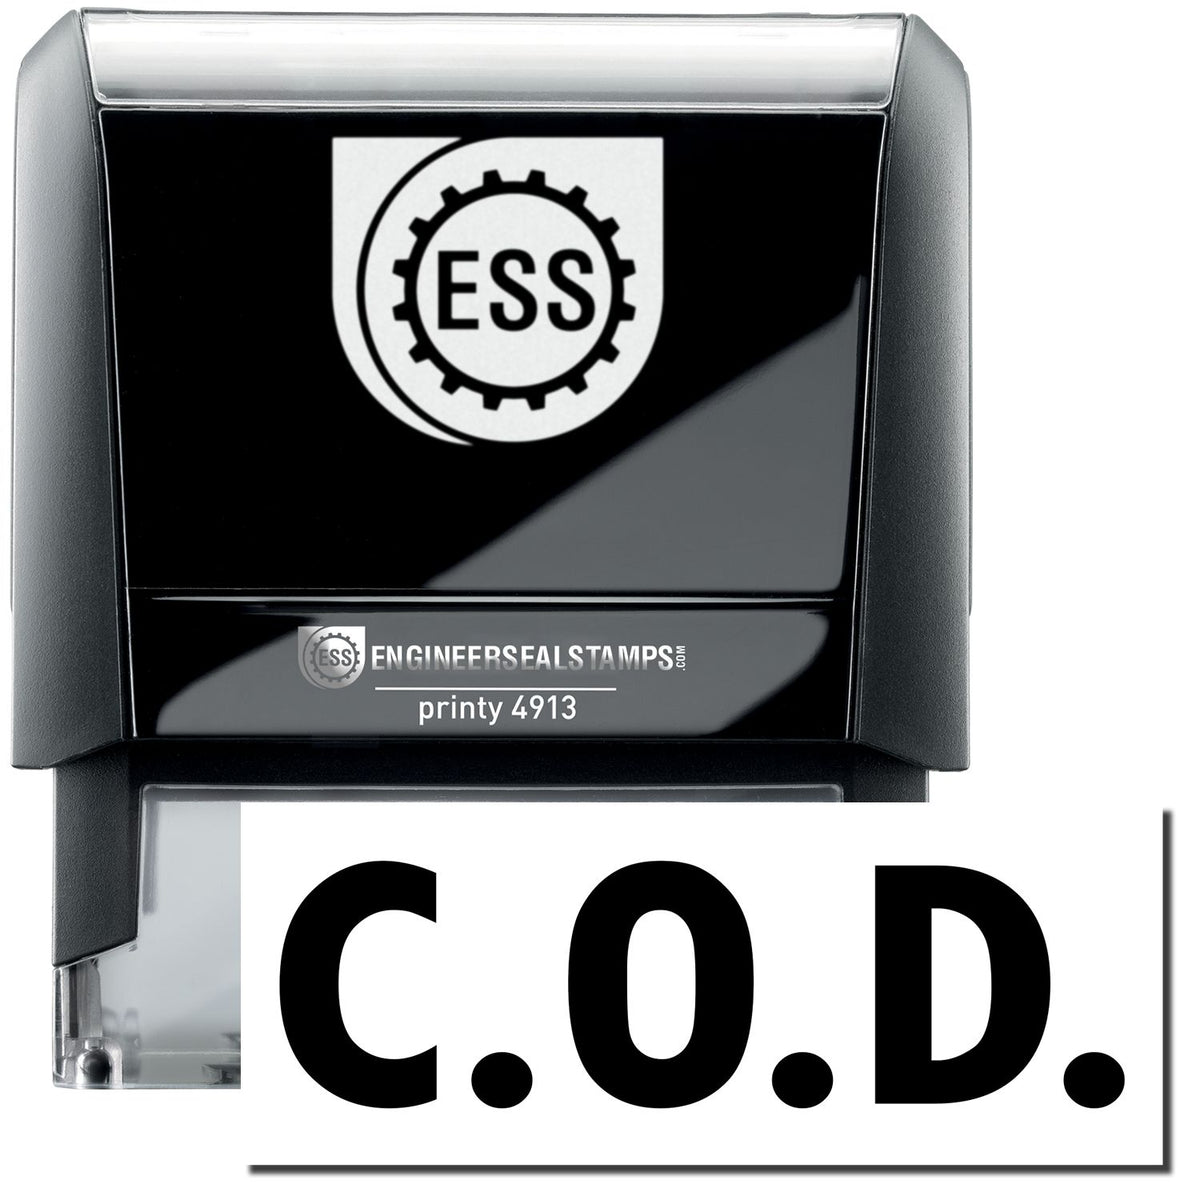 A large self-inking stamp with a stamped image showing how the text &quot;C.O.D.&quot; in a large bold font is displayed by it.